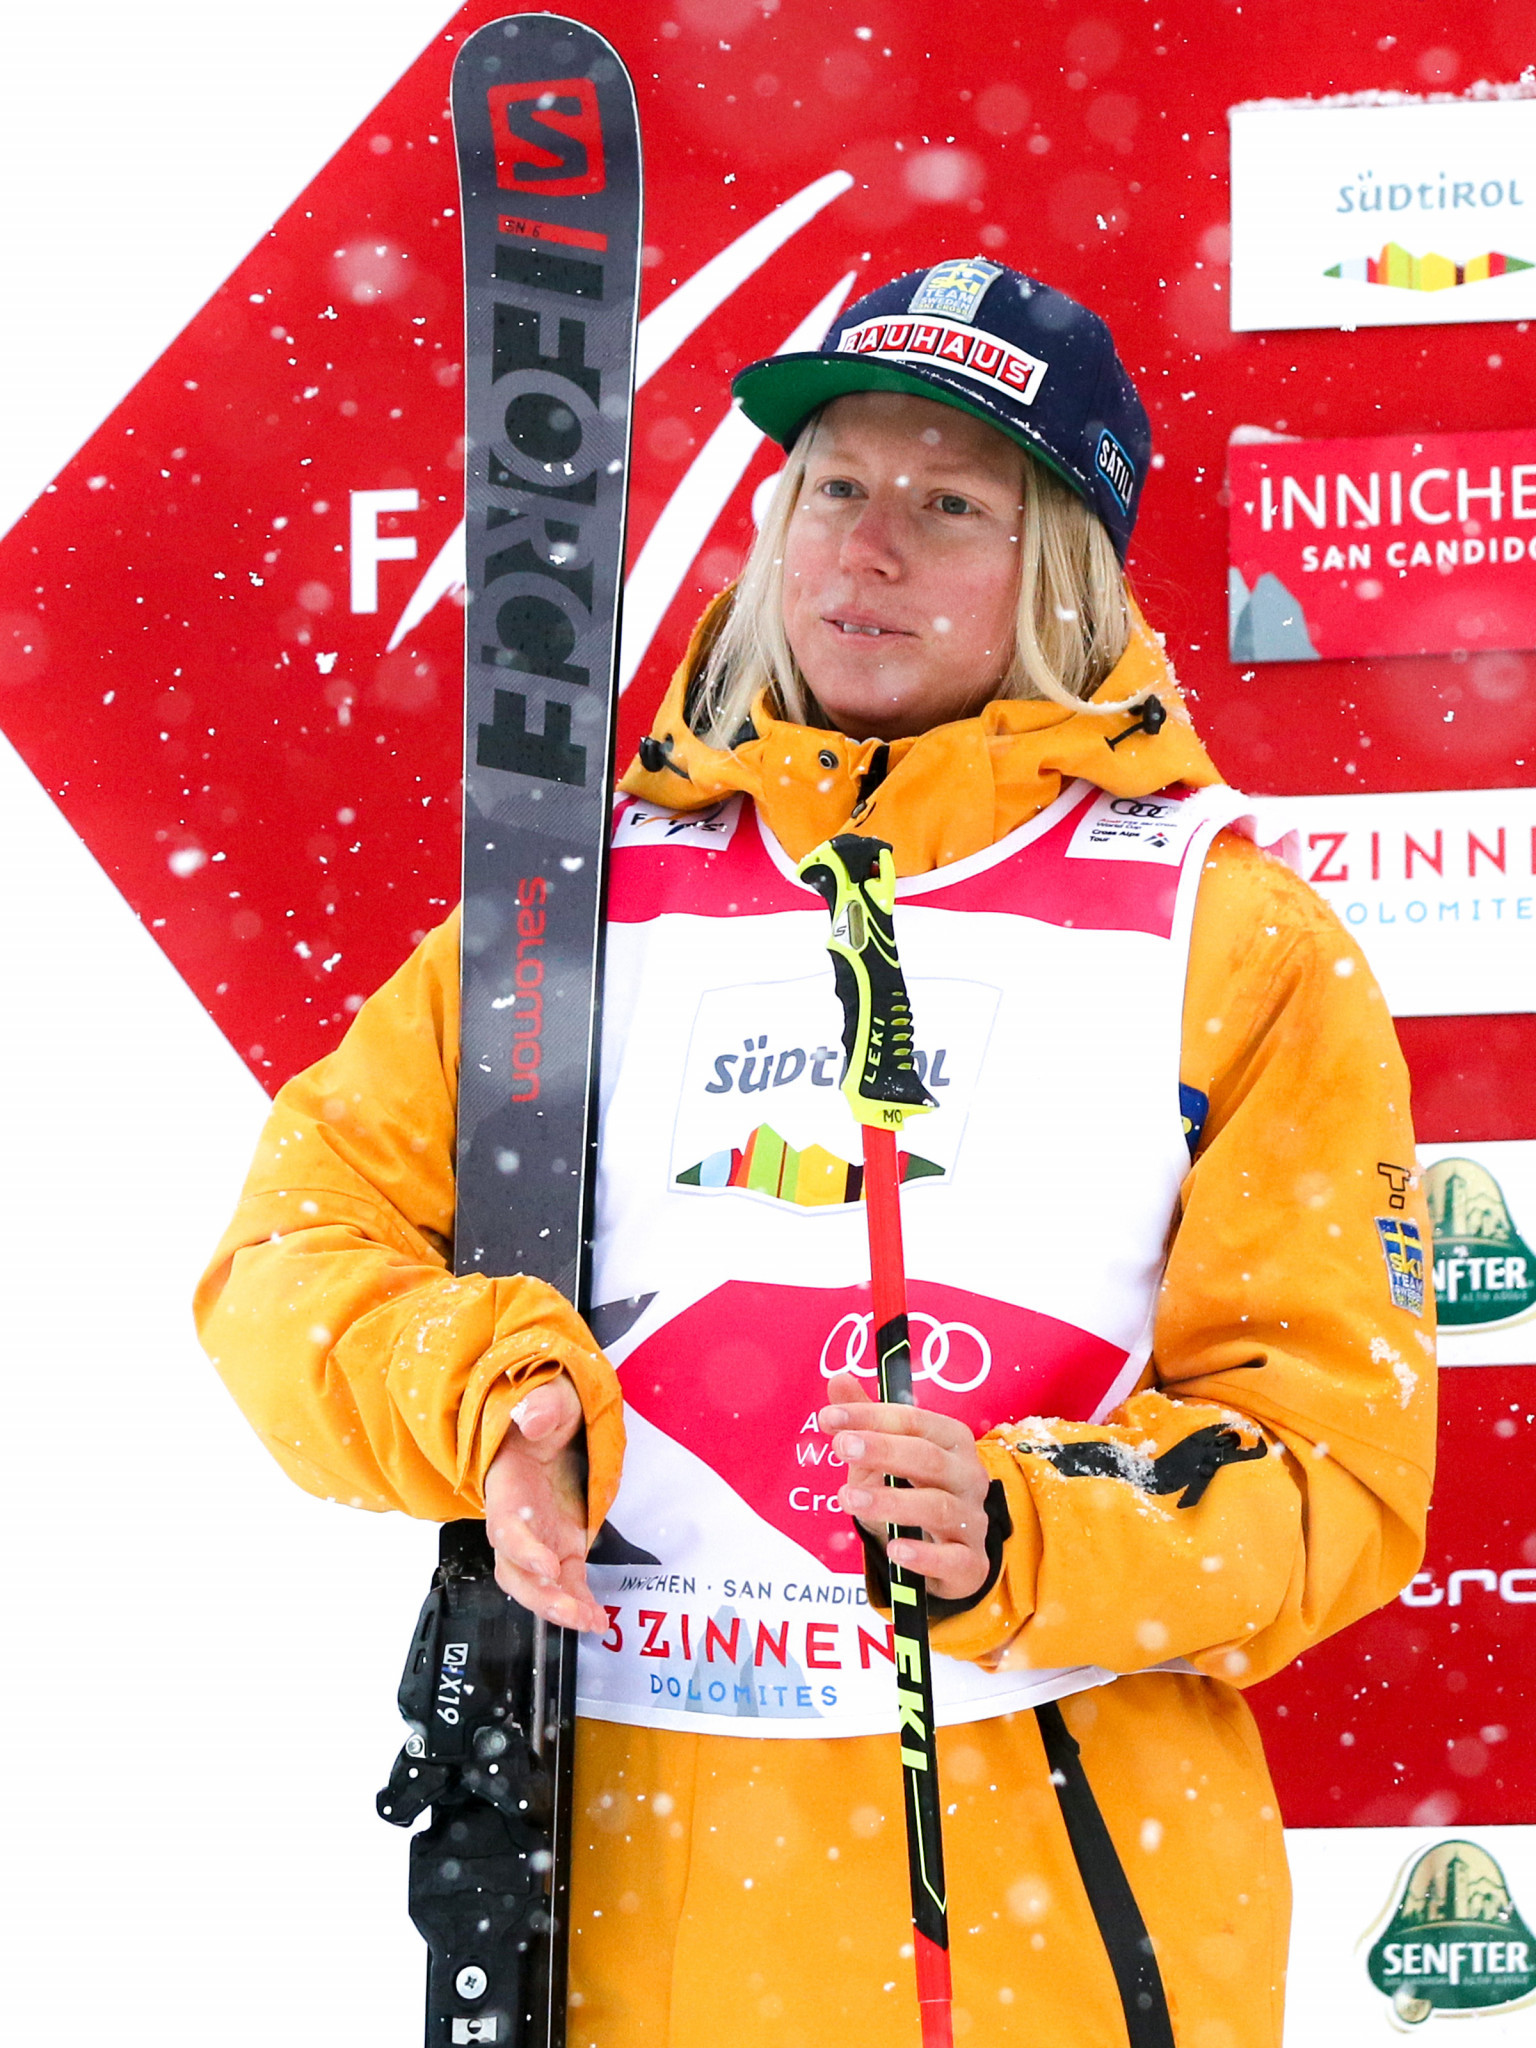 Näslund earns hat-trick of overall FIS Freestyle Ski Cross titles as Innichen World Cup cancelled